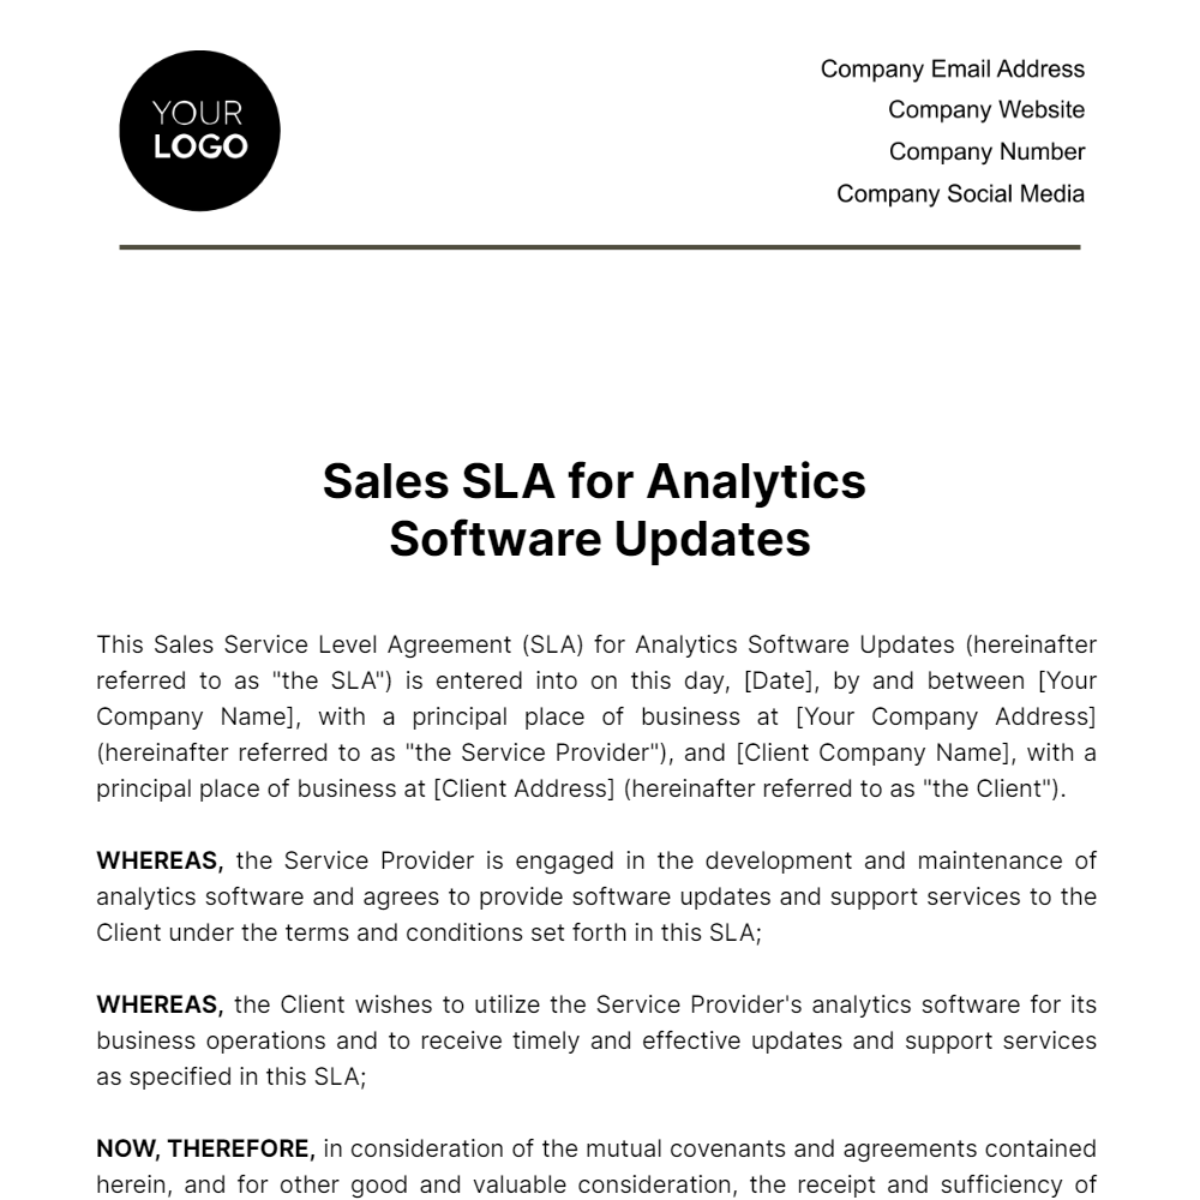 Free Sales SLA for Analytics Software Updates Template